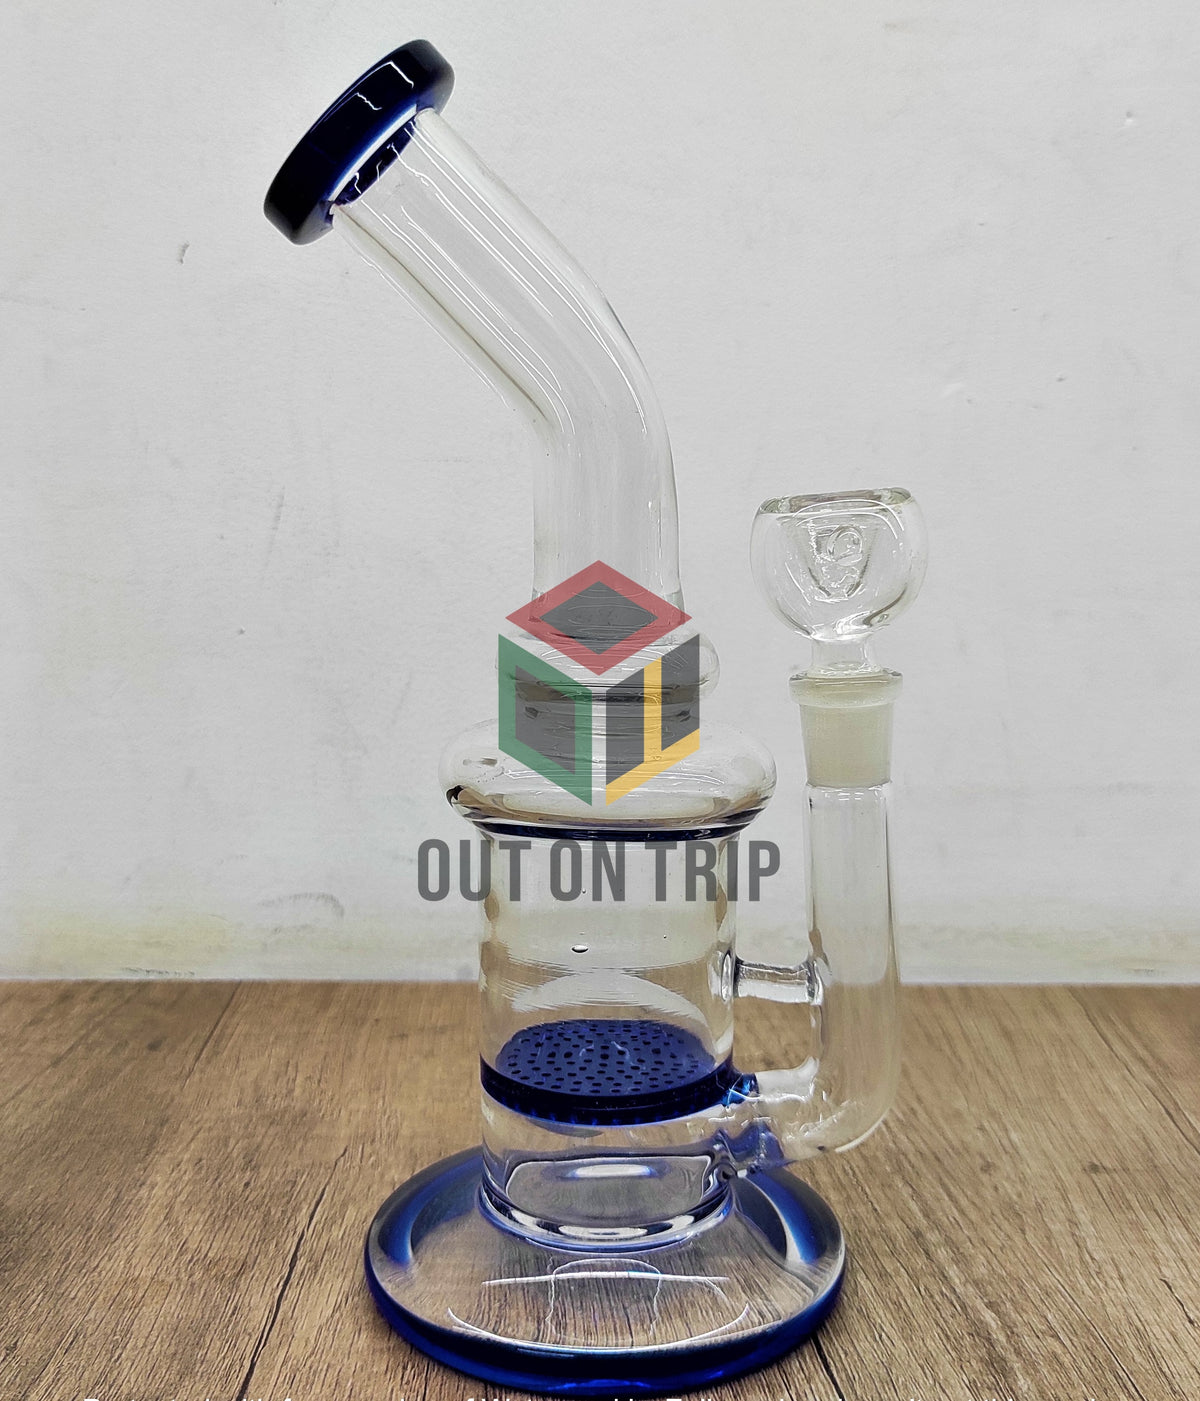 10 Inch Bent Neck Glass  Assorted Colors Bong with Honeycomb Percolator (Discontinued)